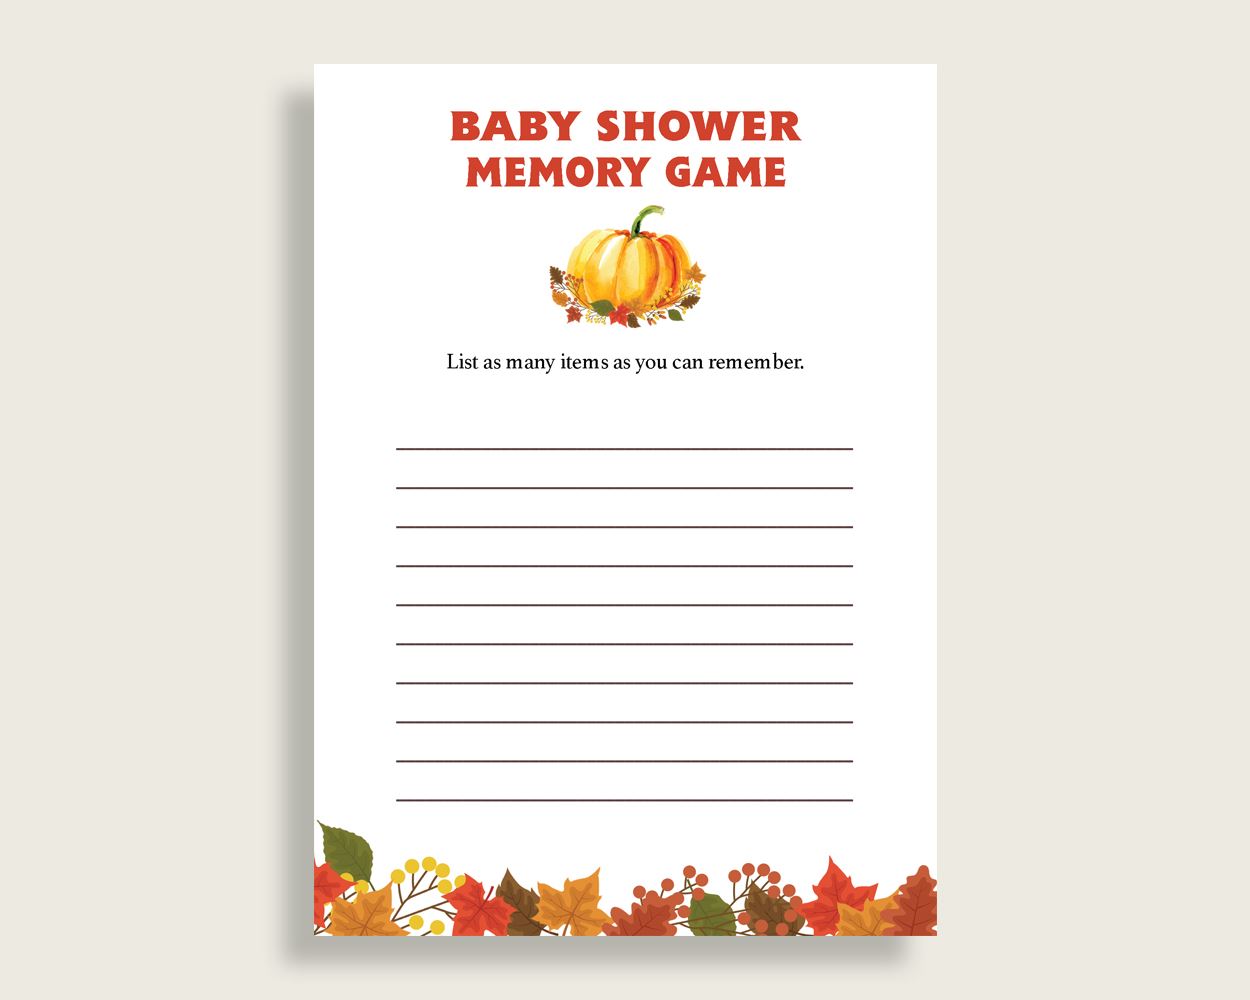 Memory Game Baby Shower Memory Game Fall Baby Shower Memory Game Baby Shower Pumpkin Memory Game Orange Brown party planning prints BPK3D - Digital Product